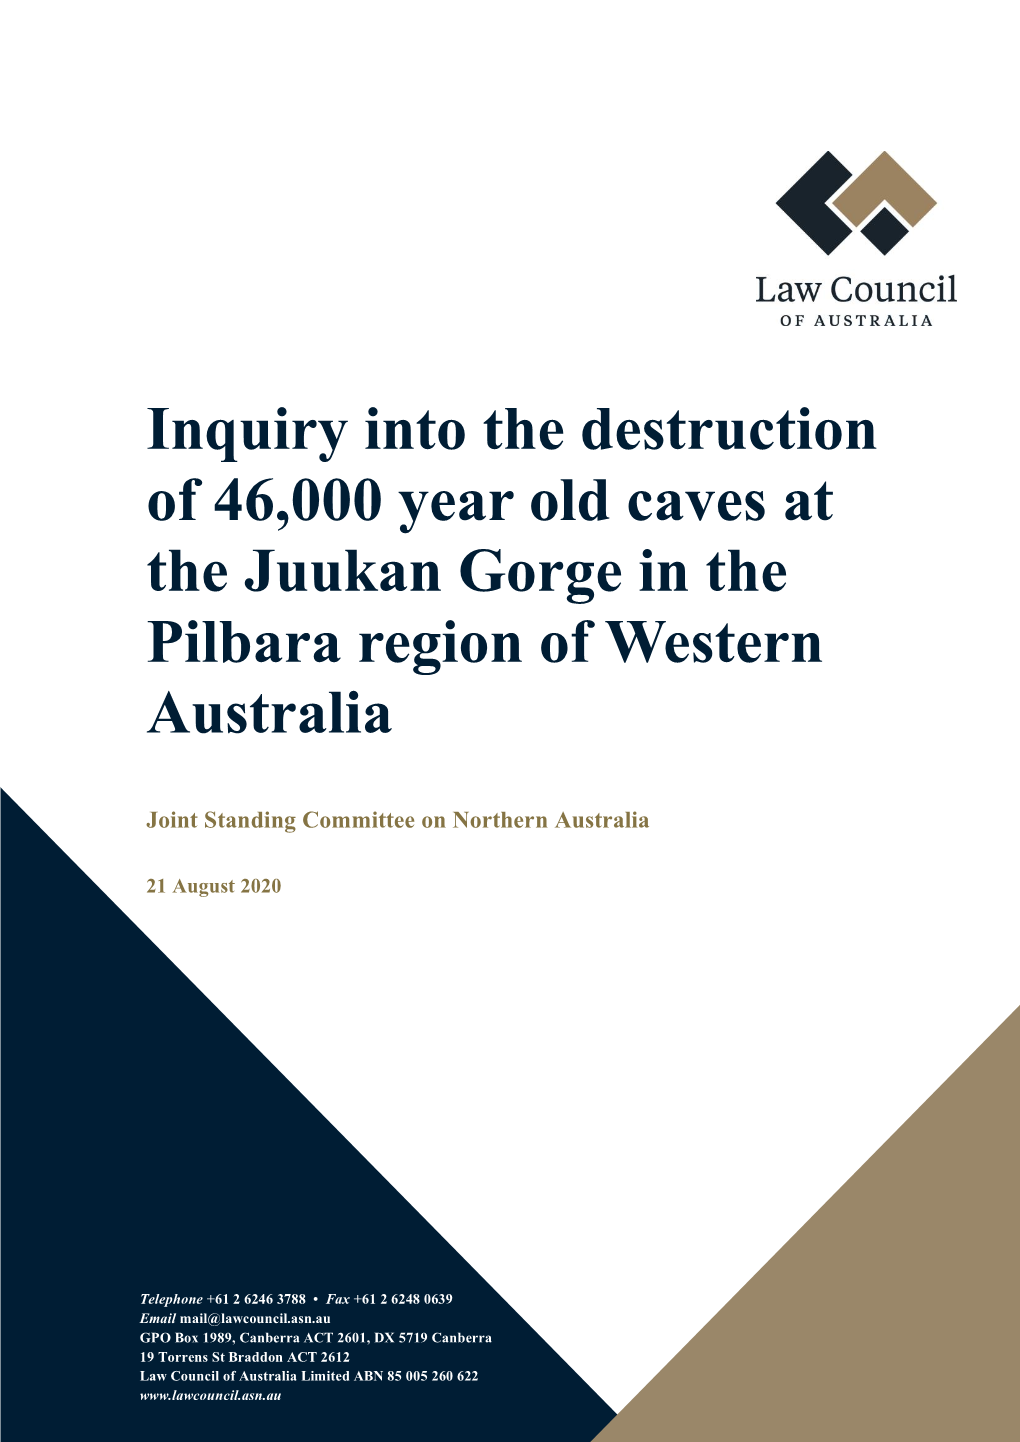 Inquiry Into the Destruction of 46,000 Year Old Caves at the Juukan Gorge in the Pilbara Region of Western Australia